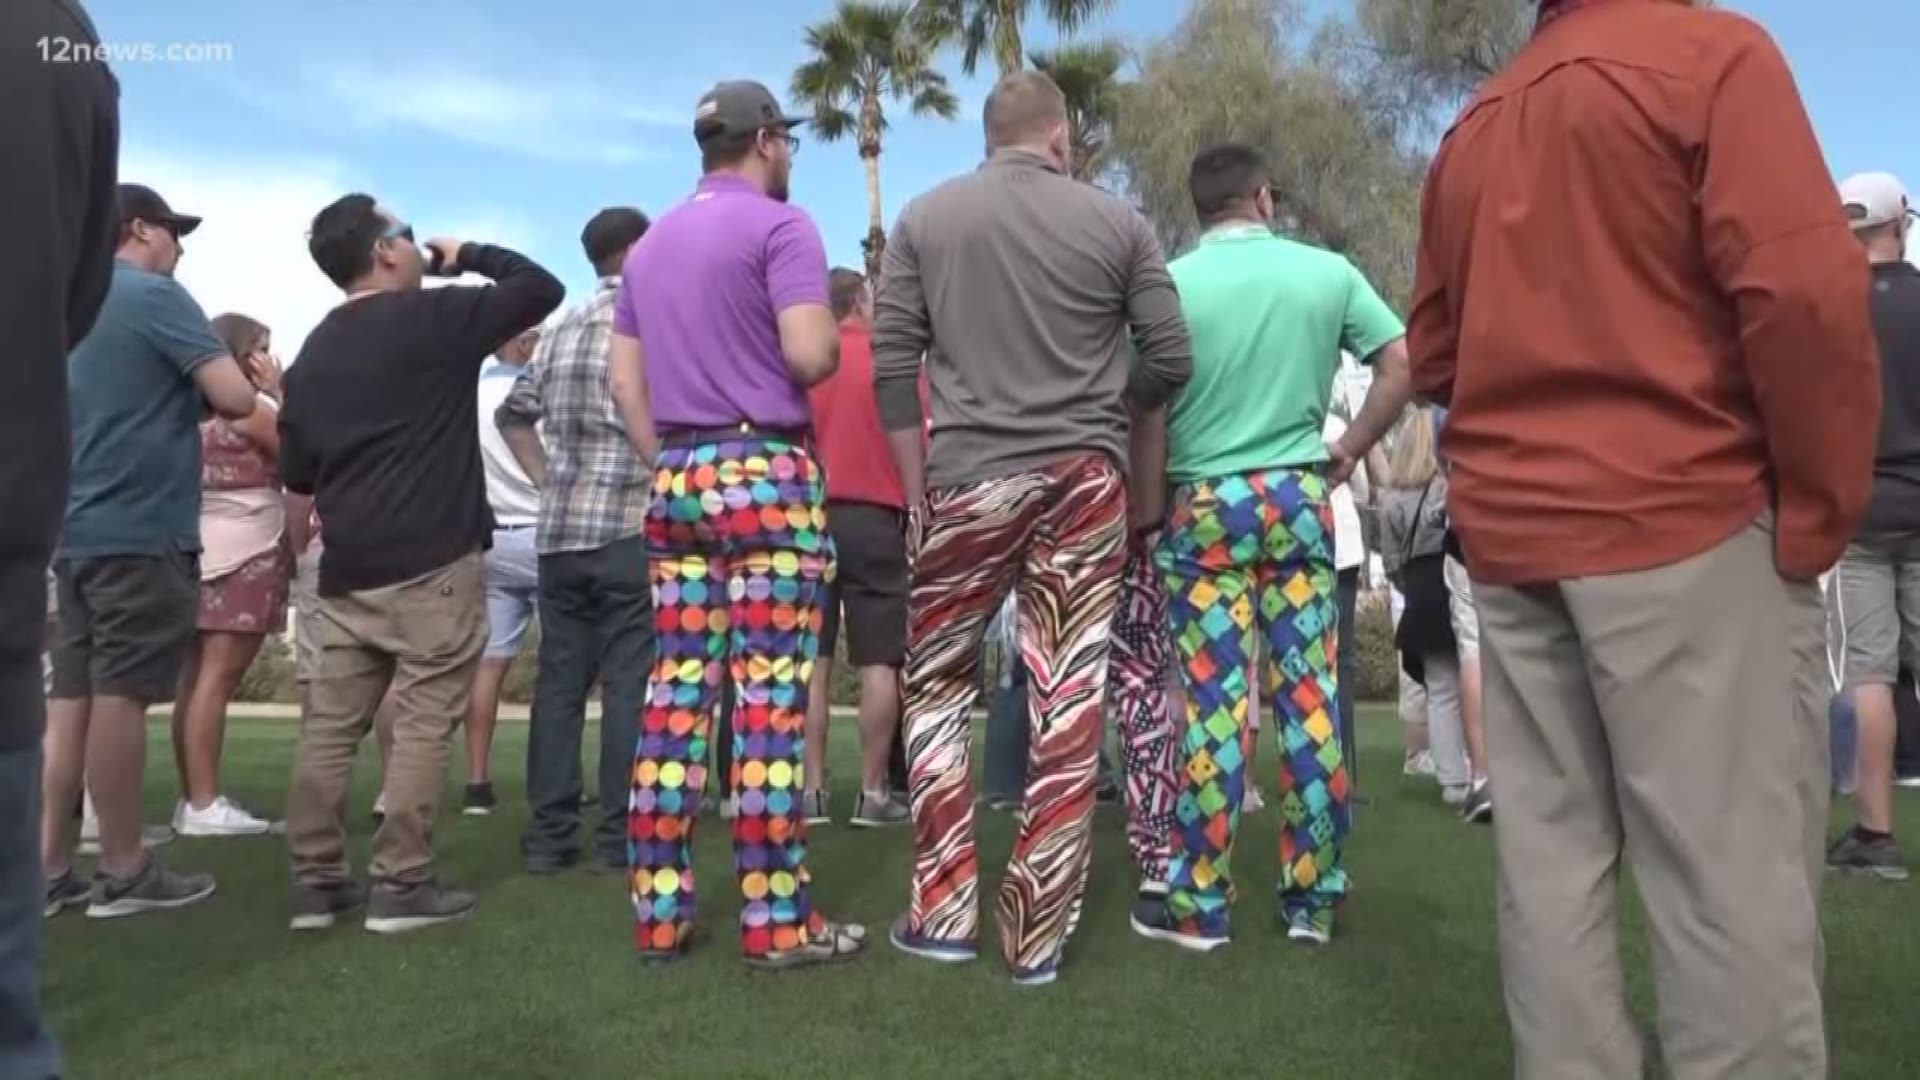 It's not just a golf tournament it's a fashion-off. Check out some of the wild style people are sporting at the Waste Management Phoenix Open.